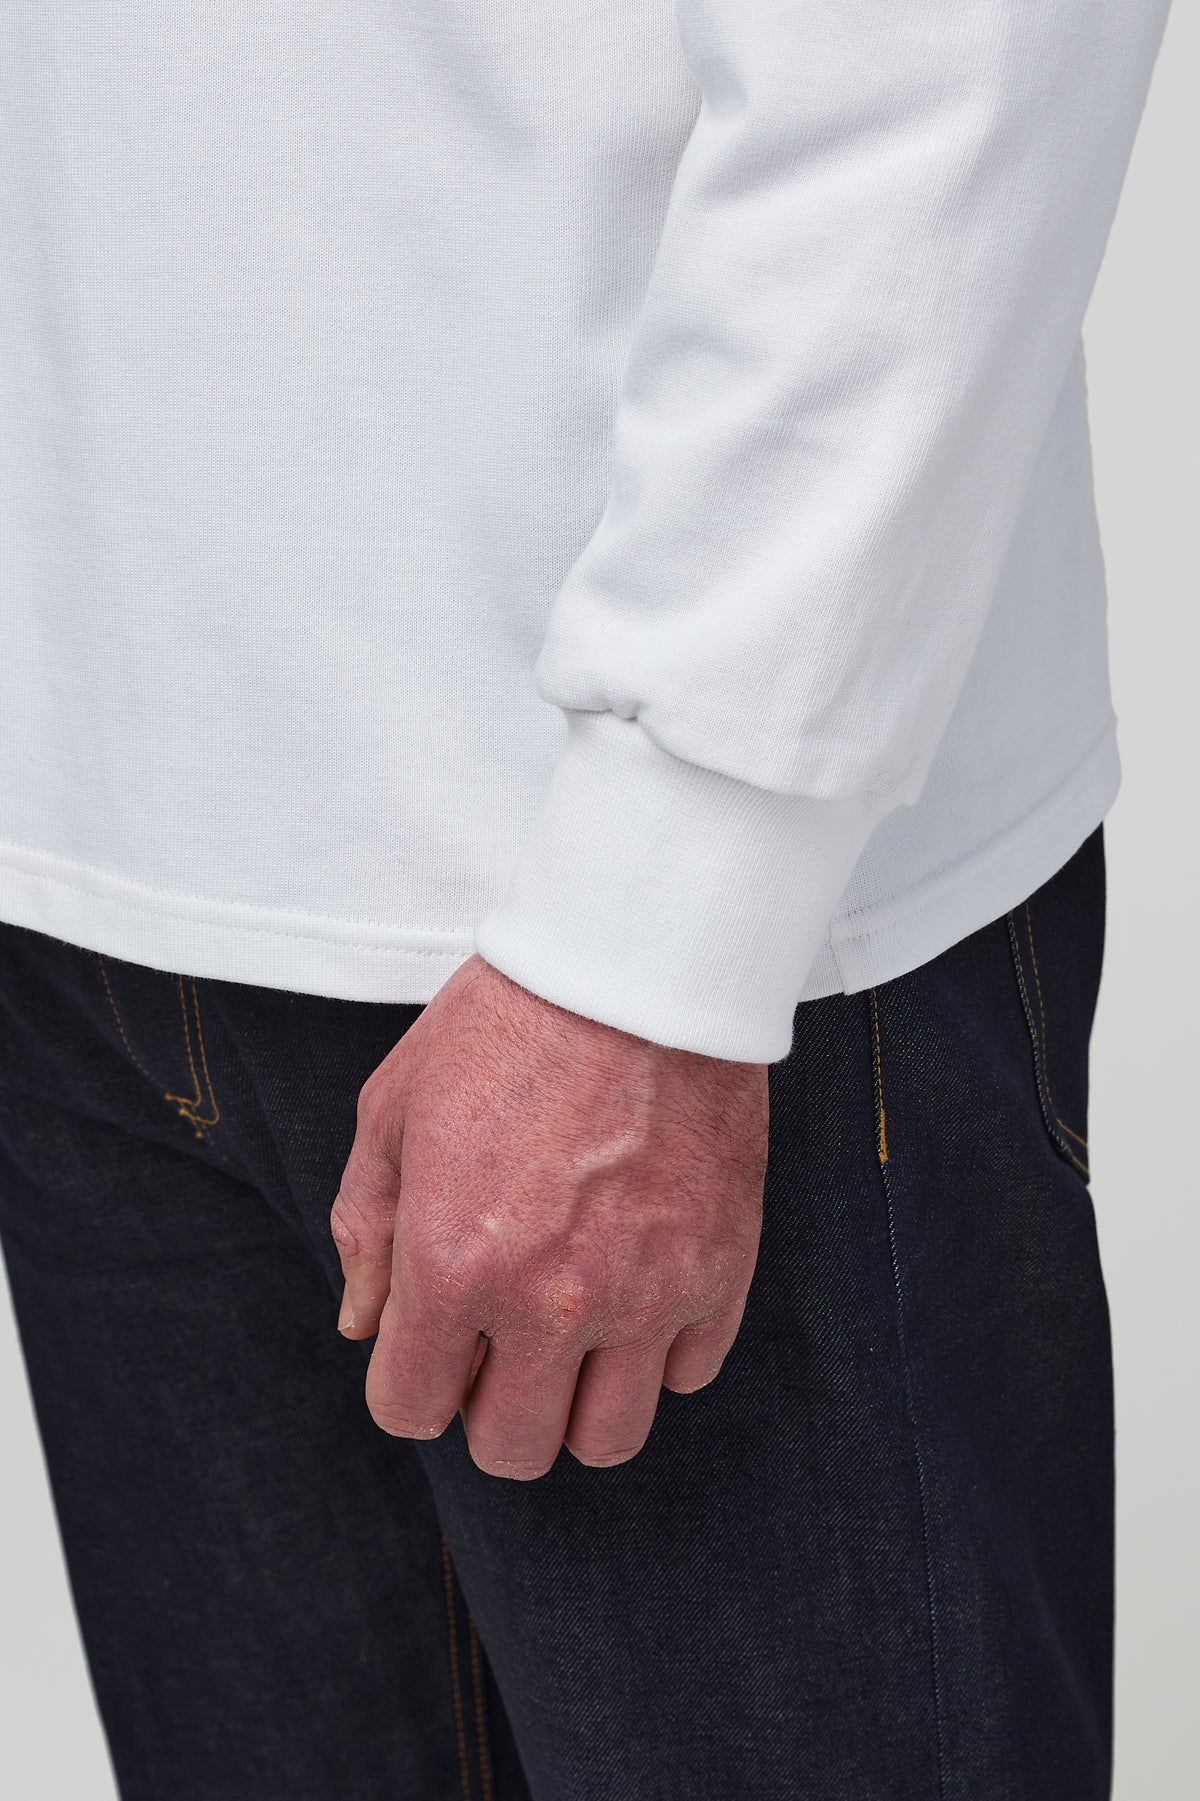 
            Cuff detail on the sleeves of rugby shit in white